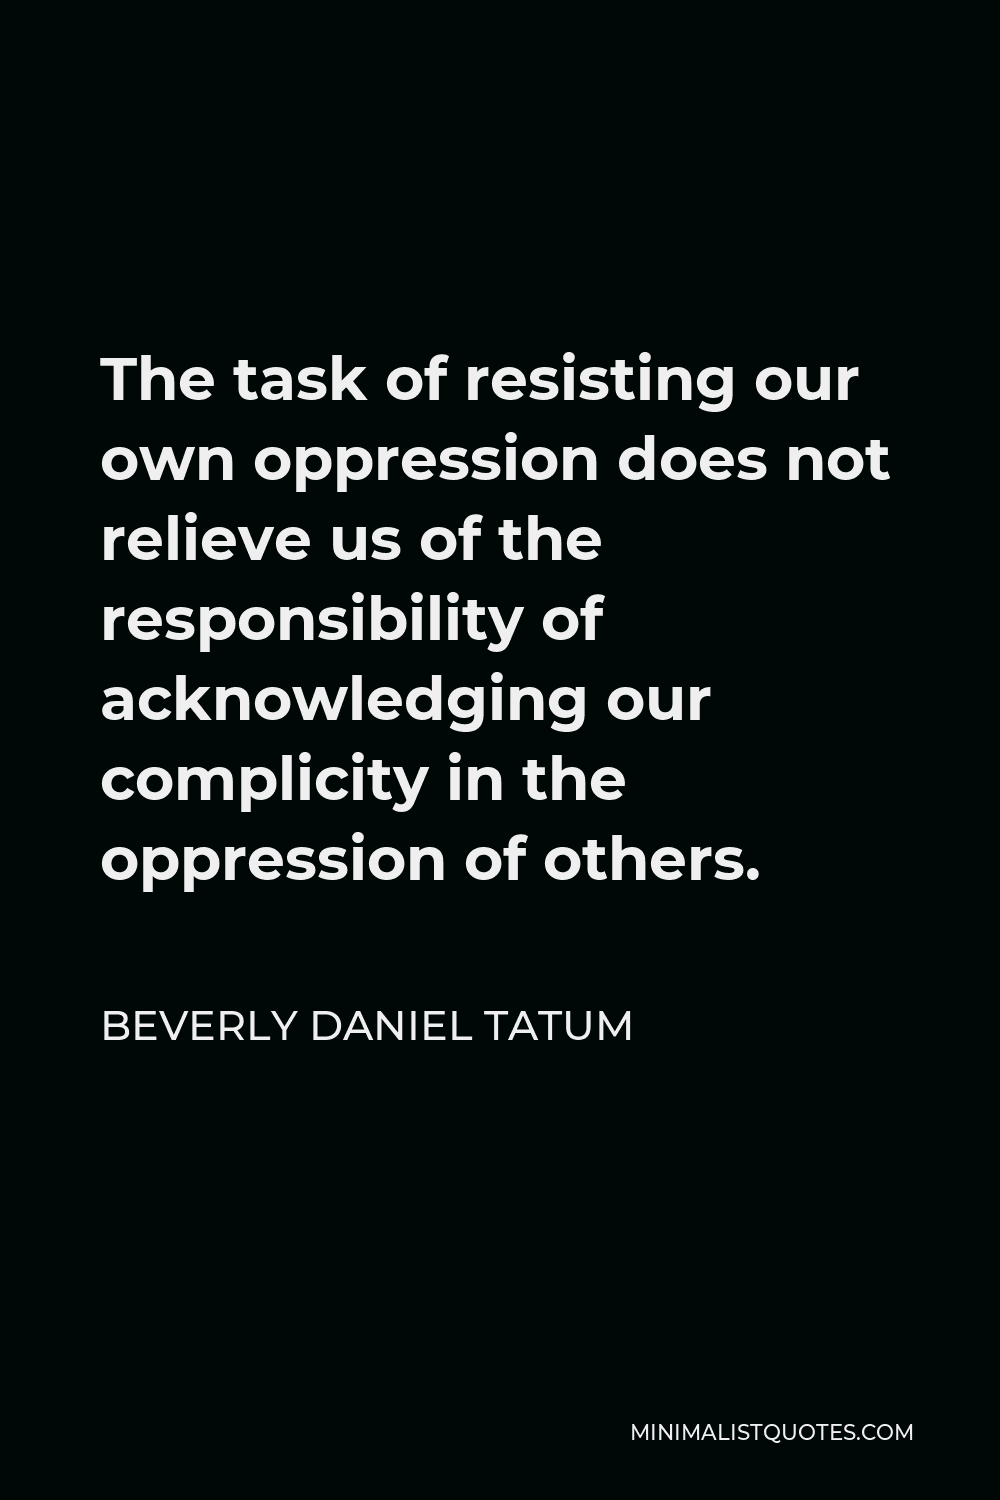 Beverly Daniel Tatum Quote - The task of resisting our own oppression does not relieve us of the responsibility of acknowledging our complicity in the oppression of others.